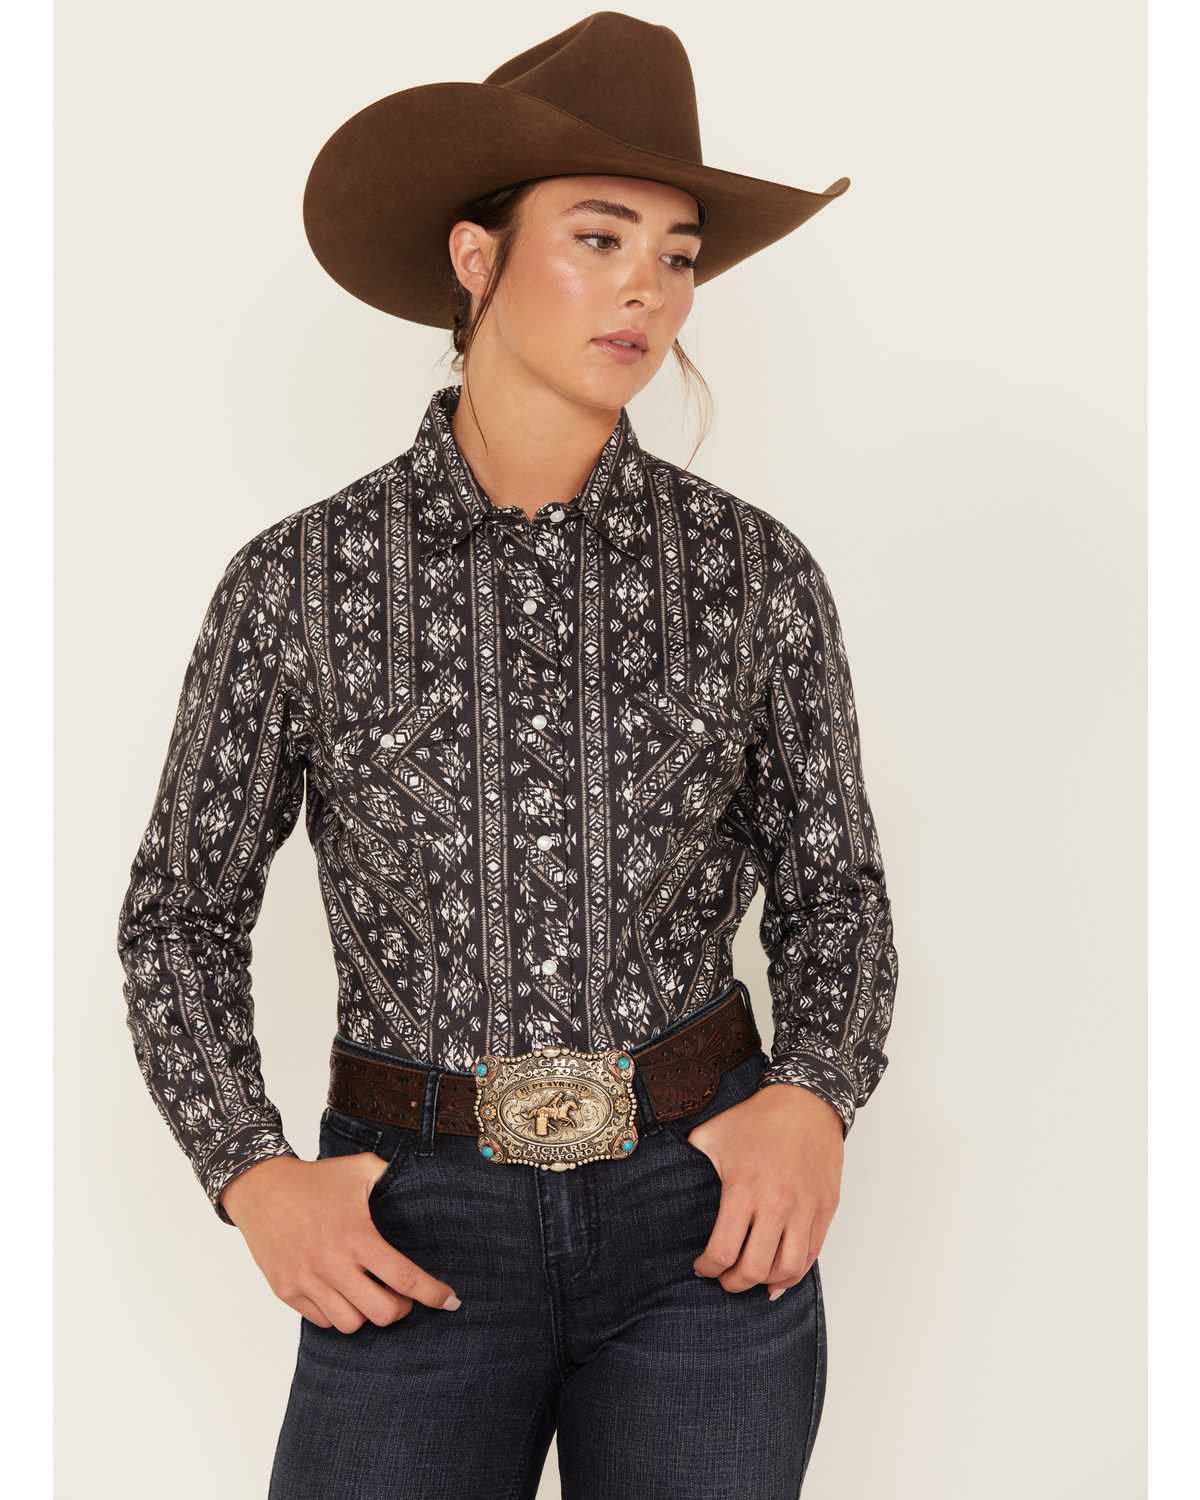 Rough Stock by Panhandle Women's Southwestern Print Long Sleeve Pearl Snap Western Shirt